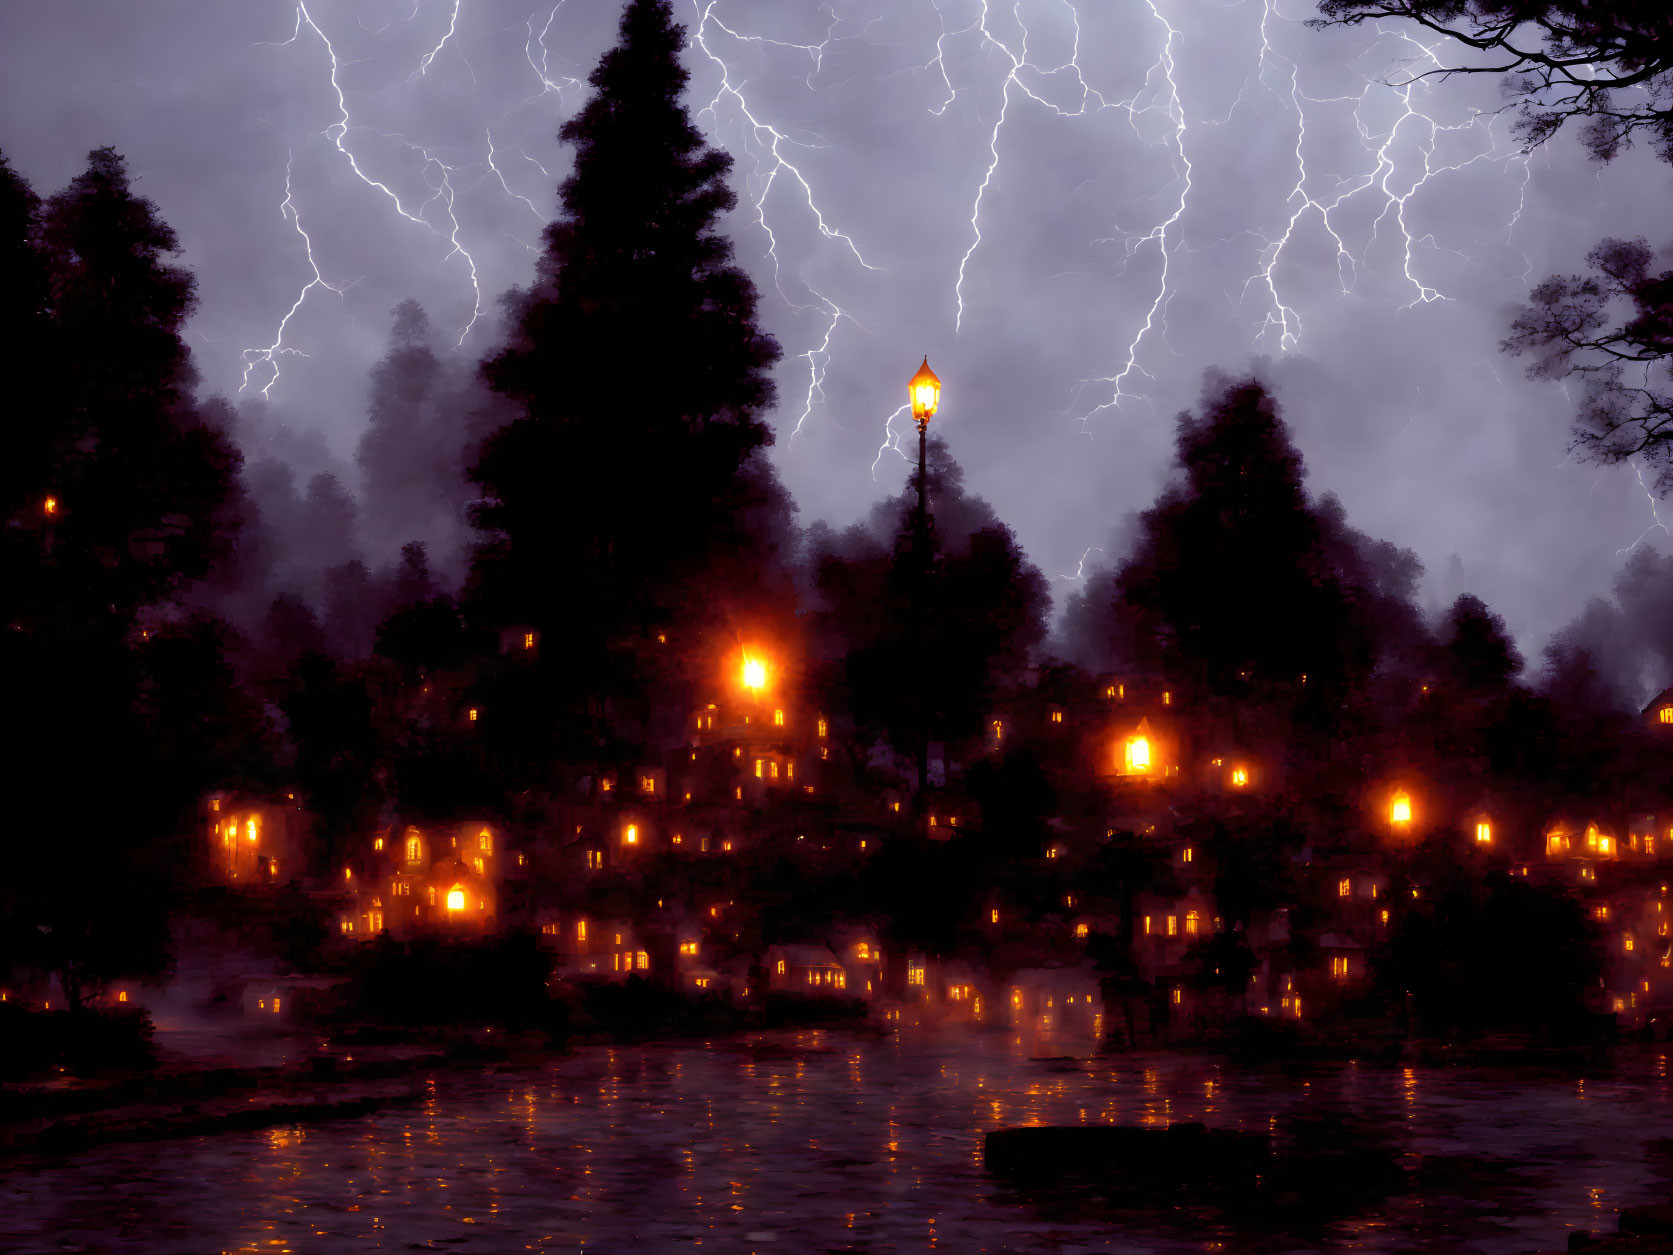 Stormy night with lightning above hazy waterside town.